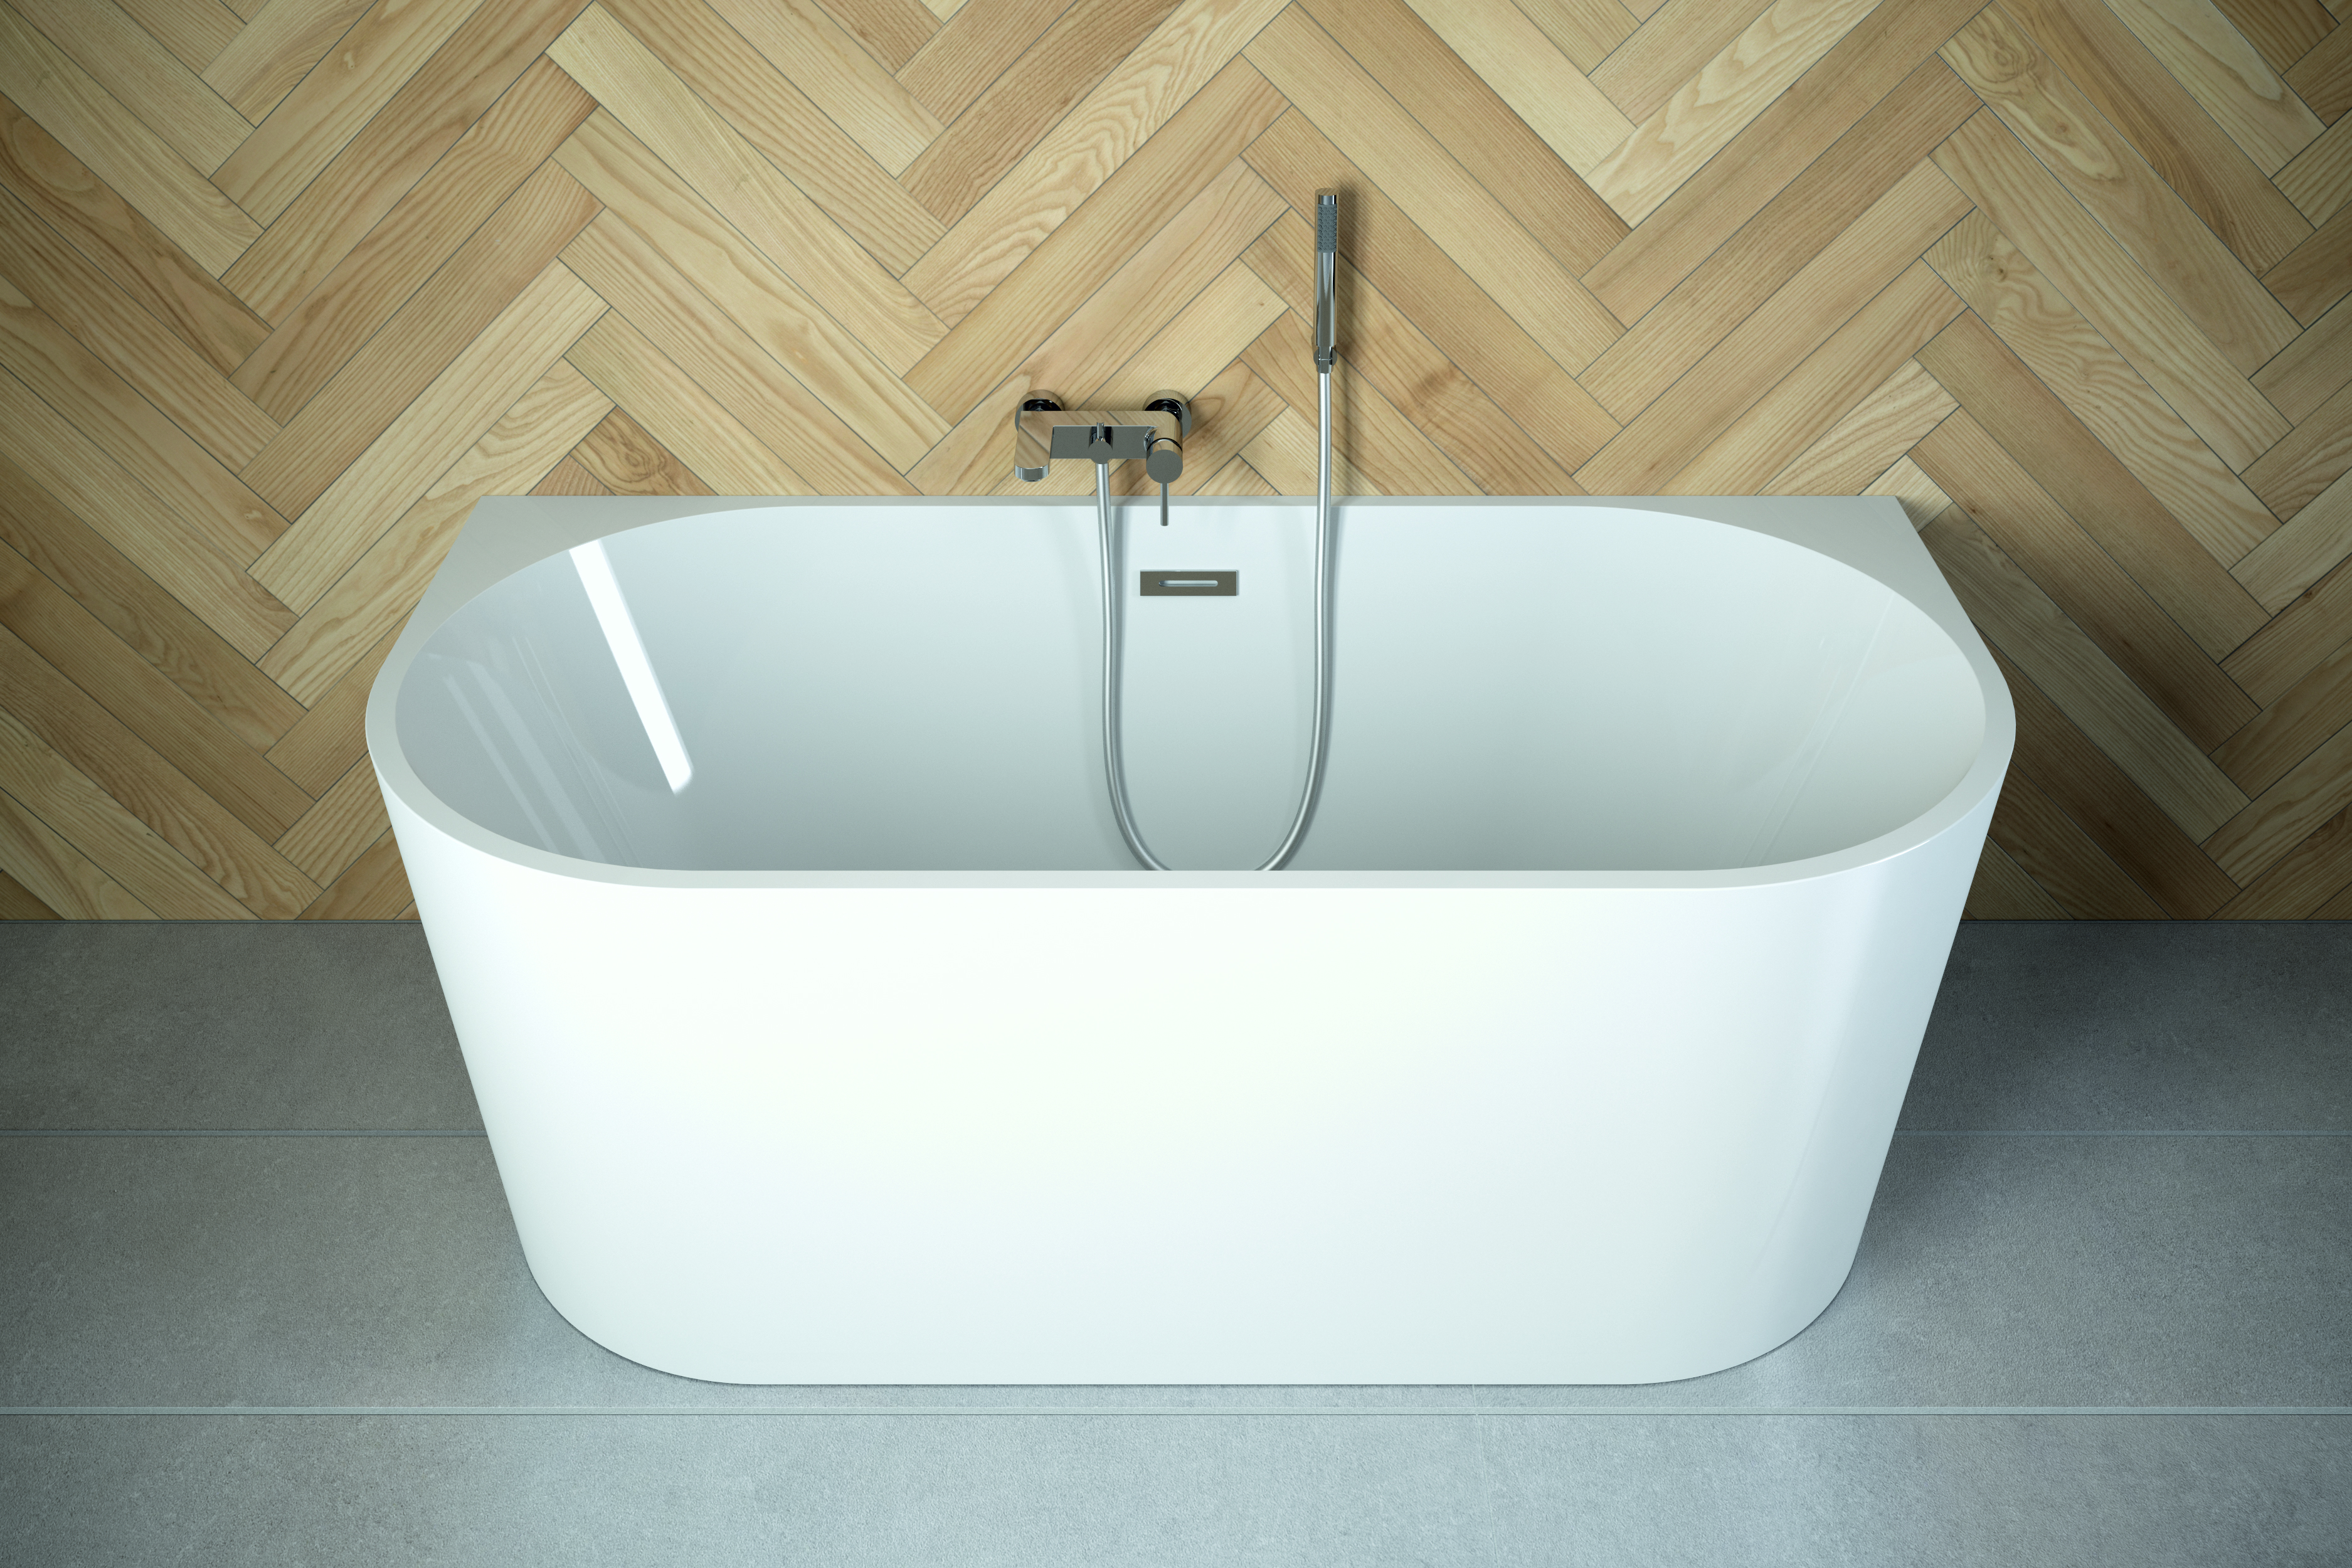 Free-standing bathtub with built-in apron & valve for mounting o